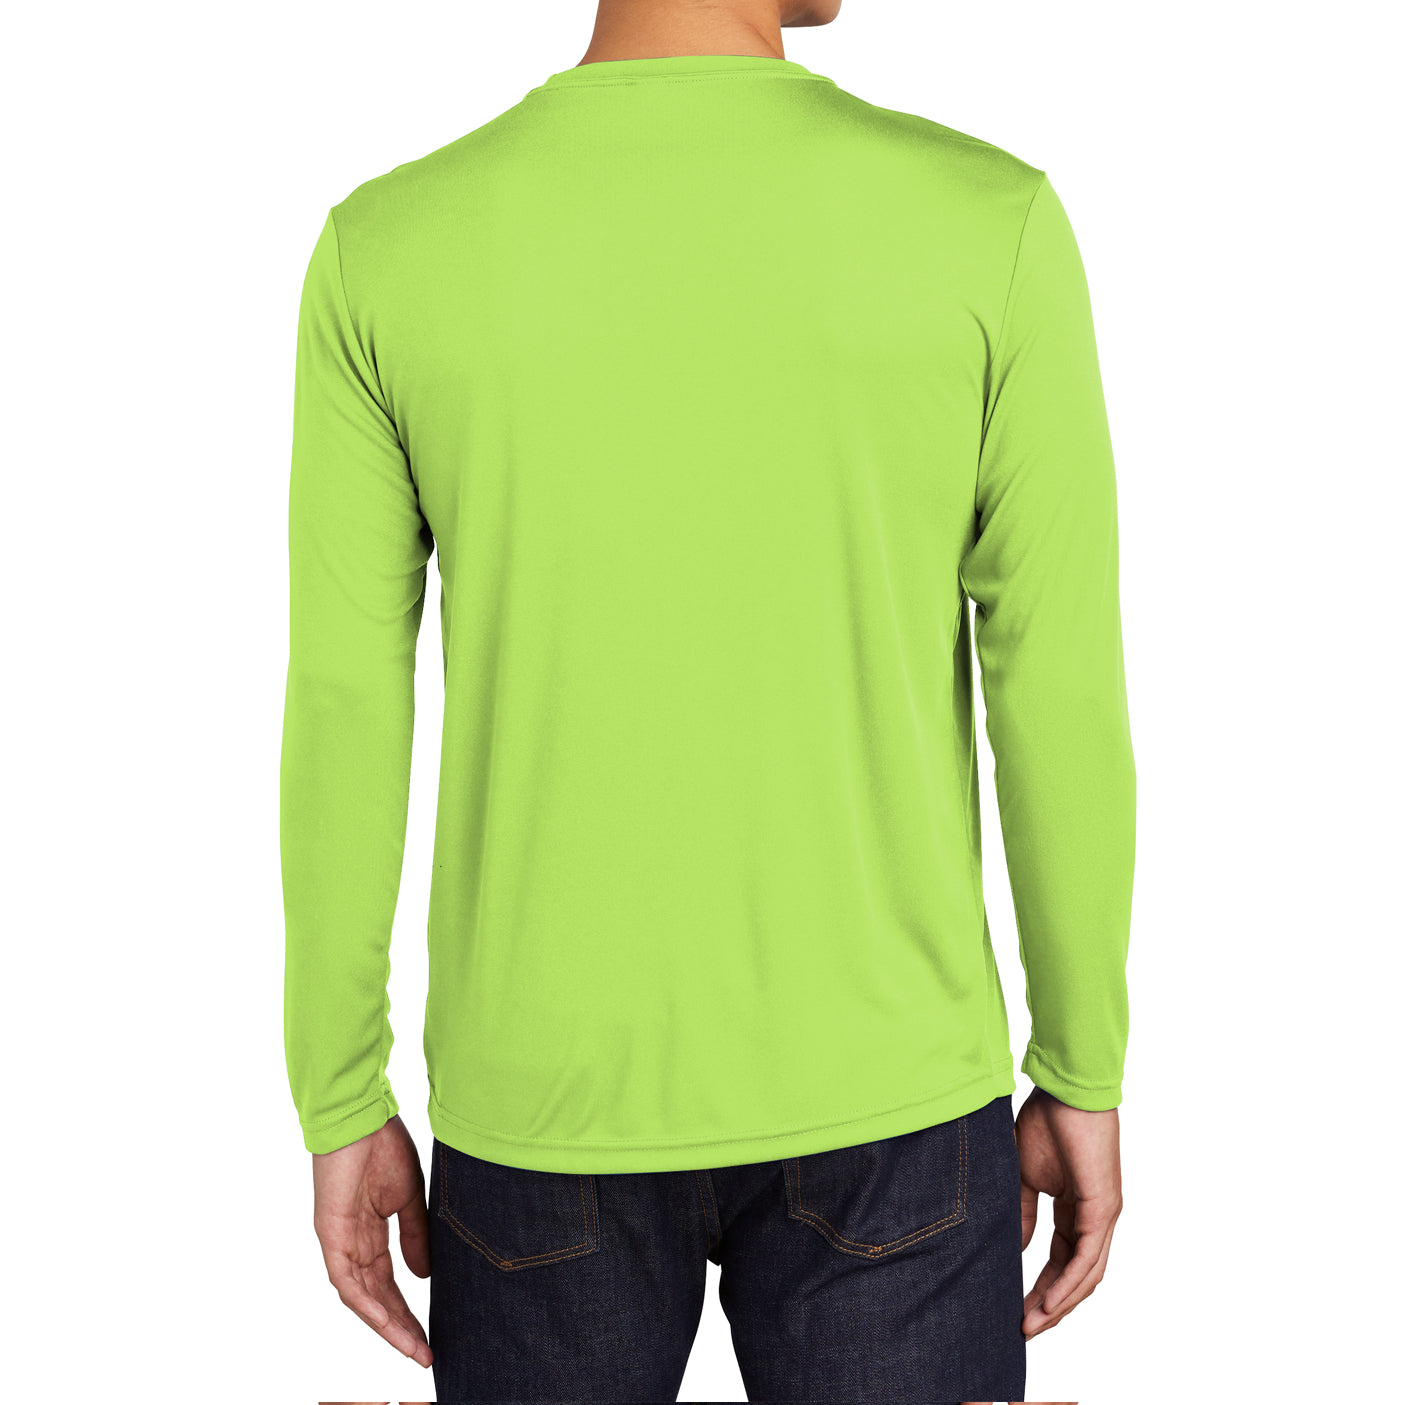 Men's Tall Long Sleeve PosiCharge Competitor Tee